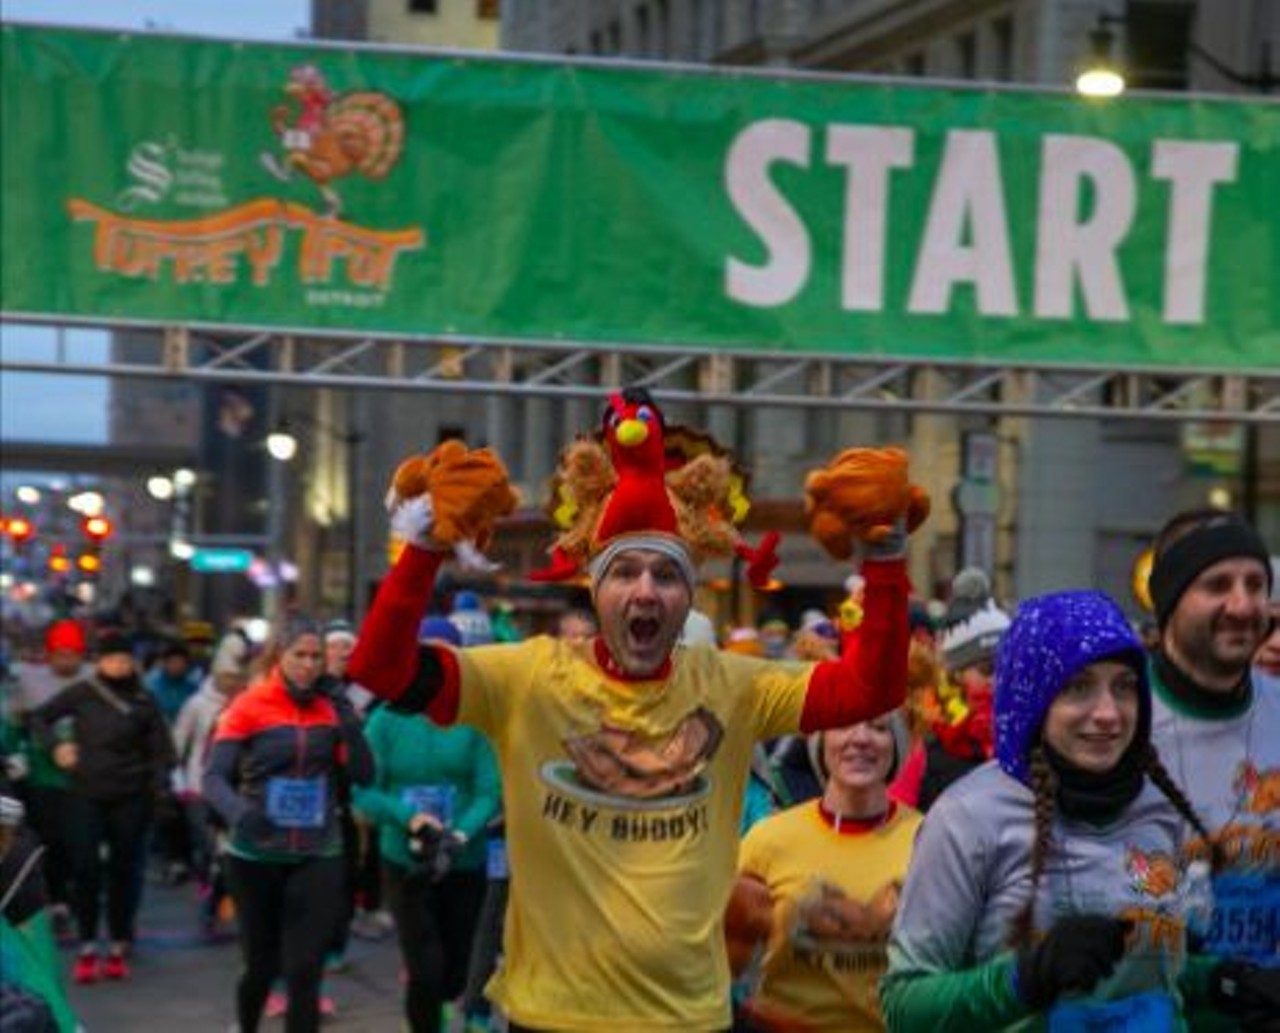 All of the ambitious runners we saw at Detroit's Turkey Trot 5K on Thanksgiving